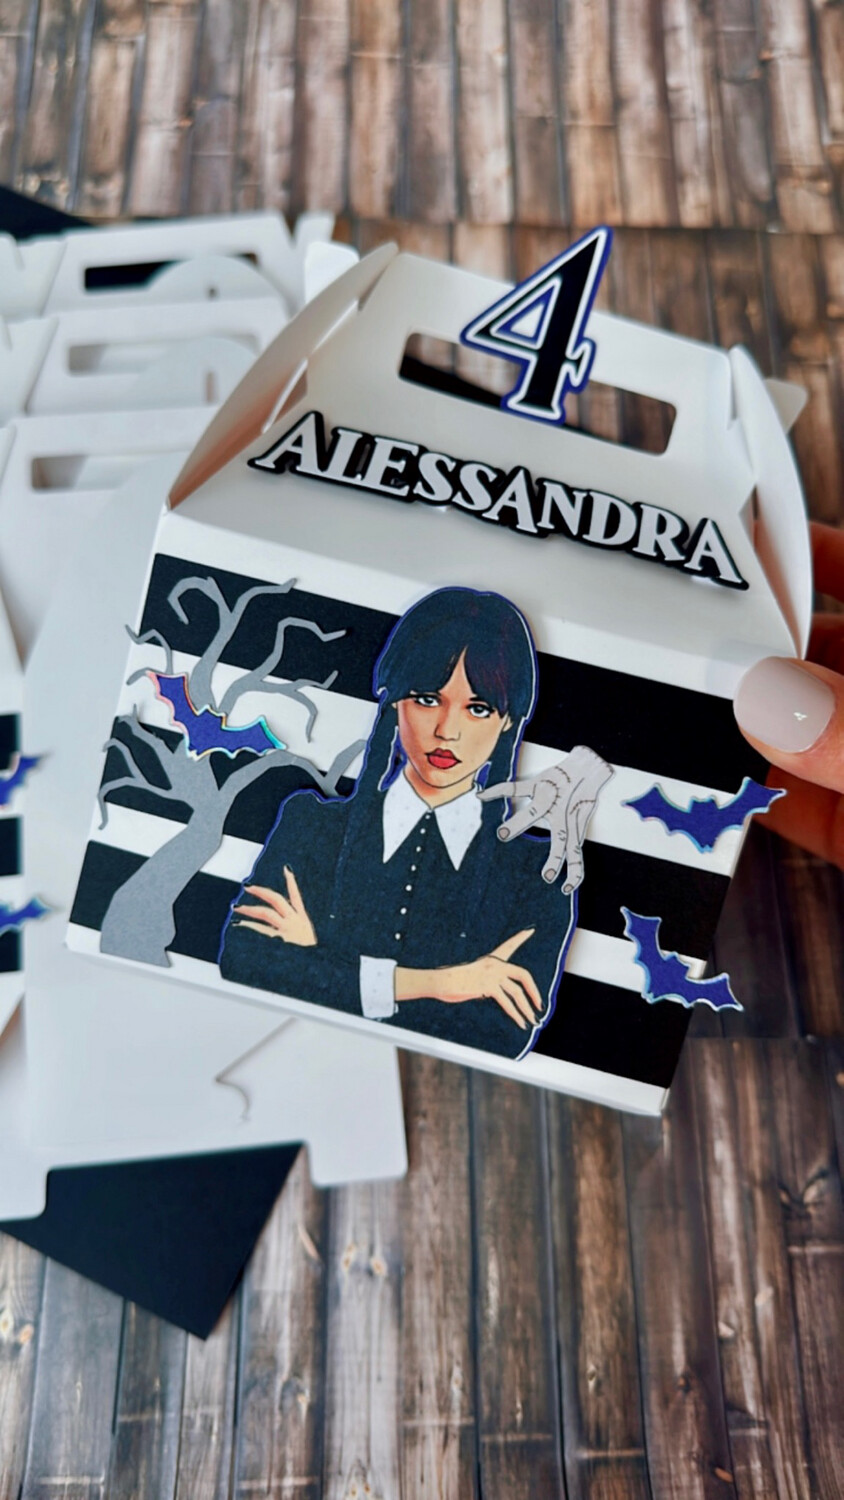 Wednesday Favor Boxes, Wednesday Addams Birthday, Black Birthday, Wednesday Show, Wednesday Decorations, Dessert Table Treat boxes, Wednesday Party